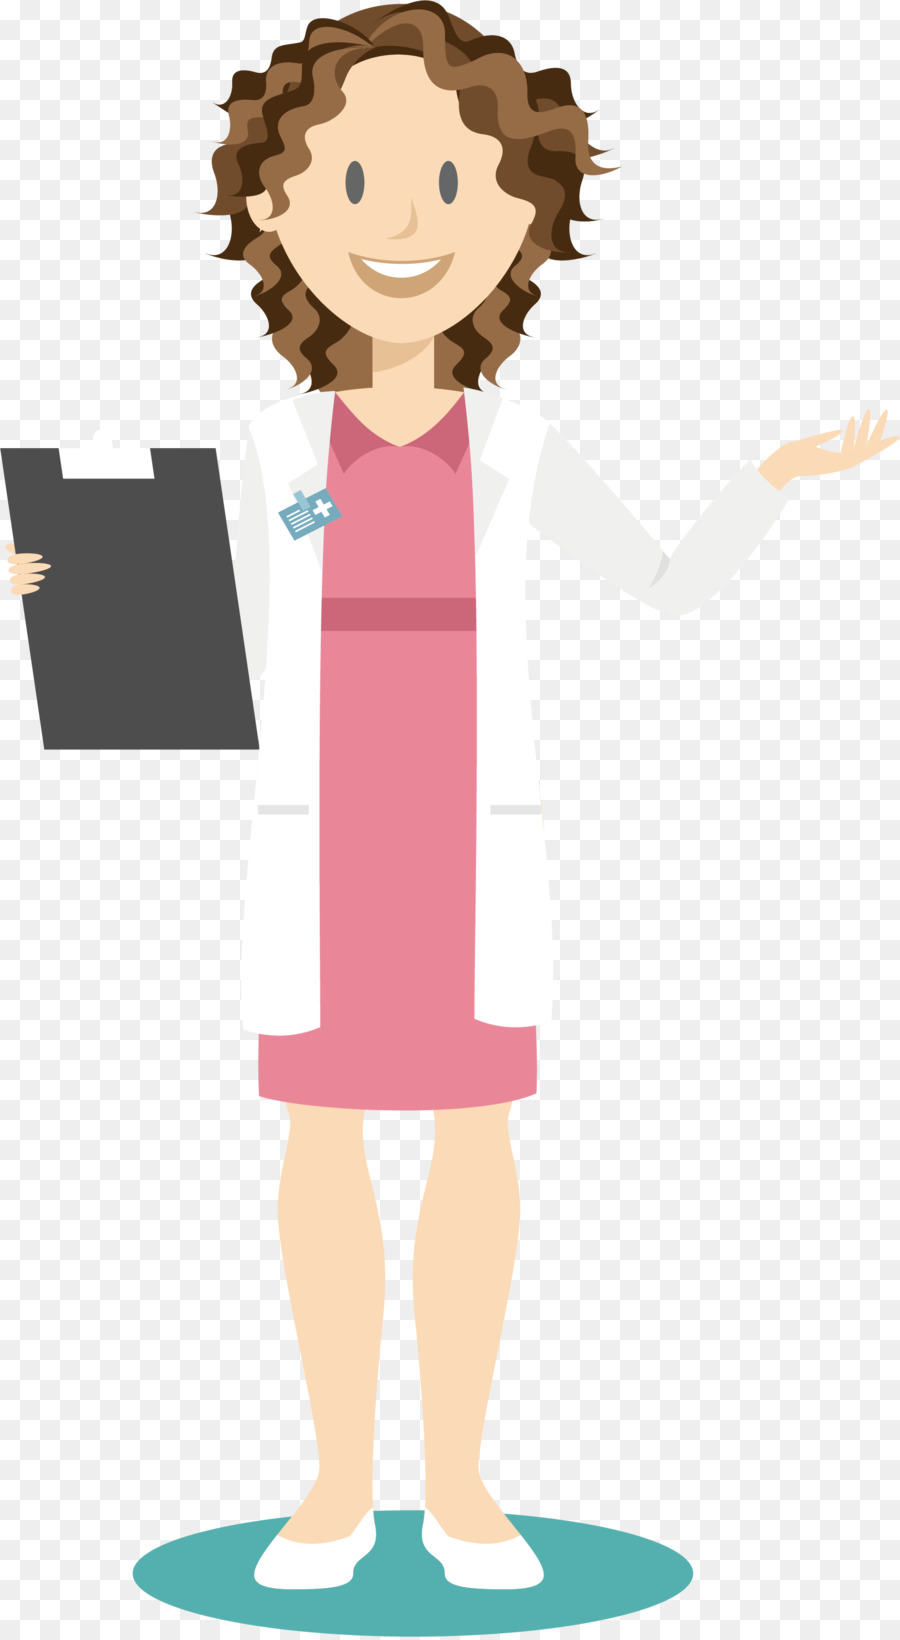 Woman Clip art - A curl up woman doctor png download - 1717*3123 - Free Transparent  png Download.